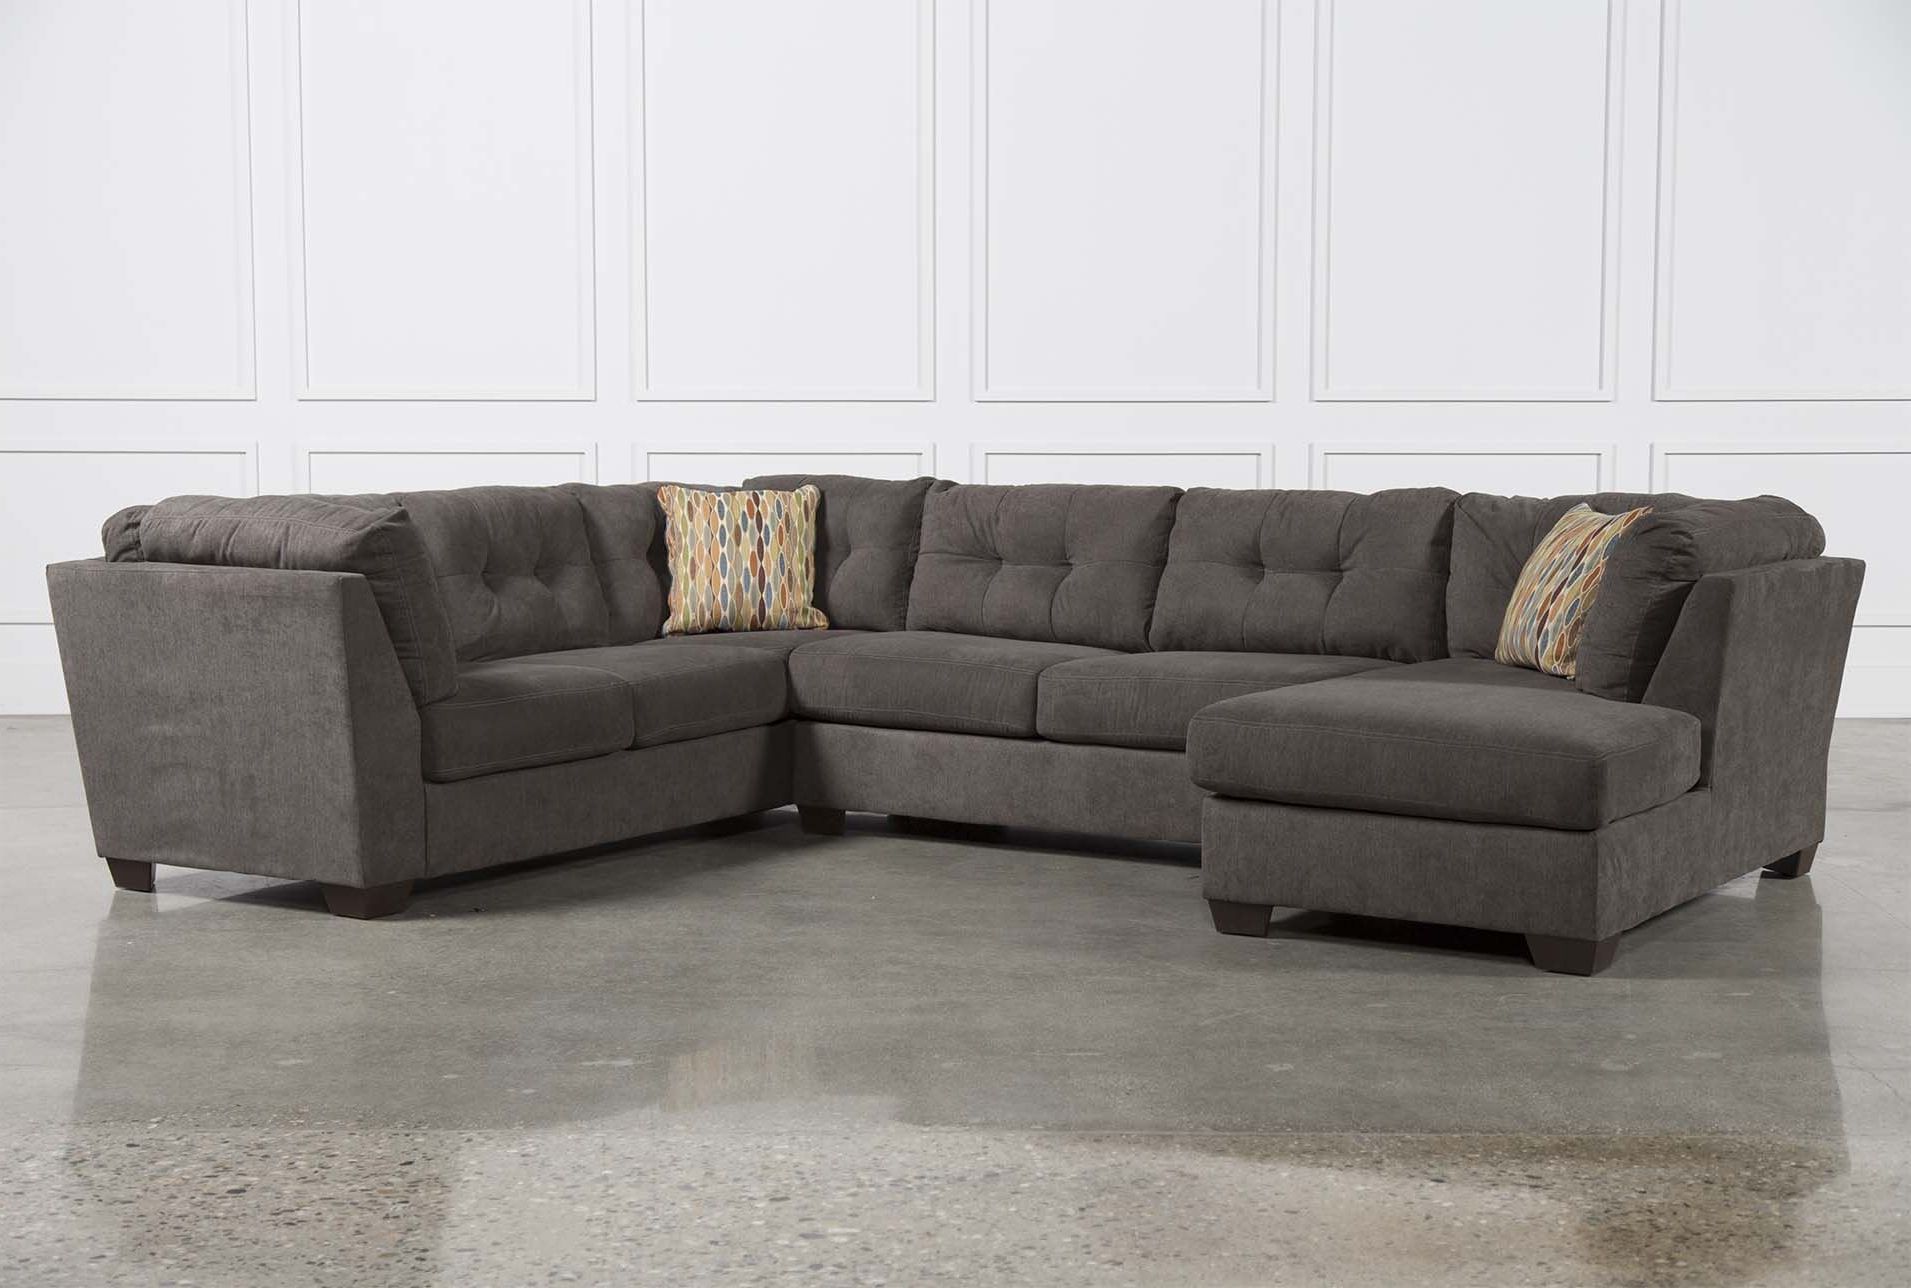 Http://tidex/sectional Sofa Beds (View 10 of 20)